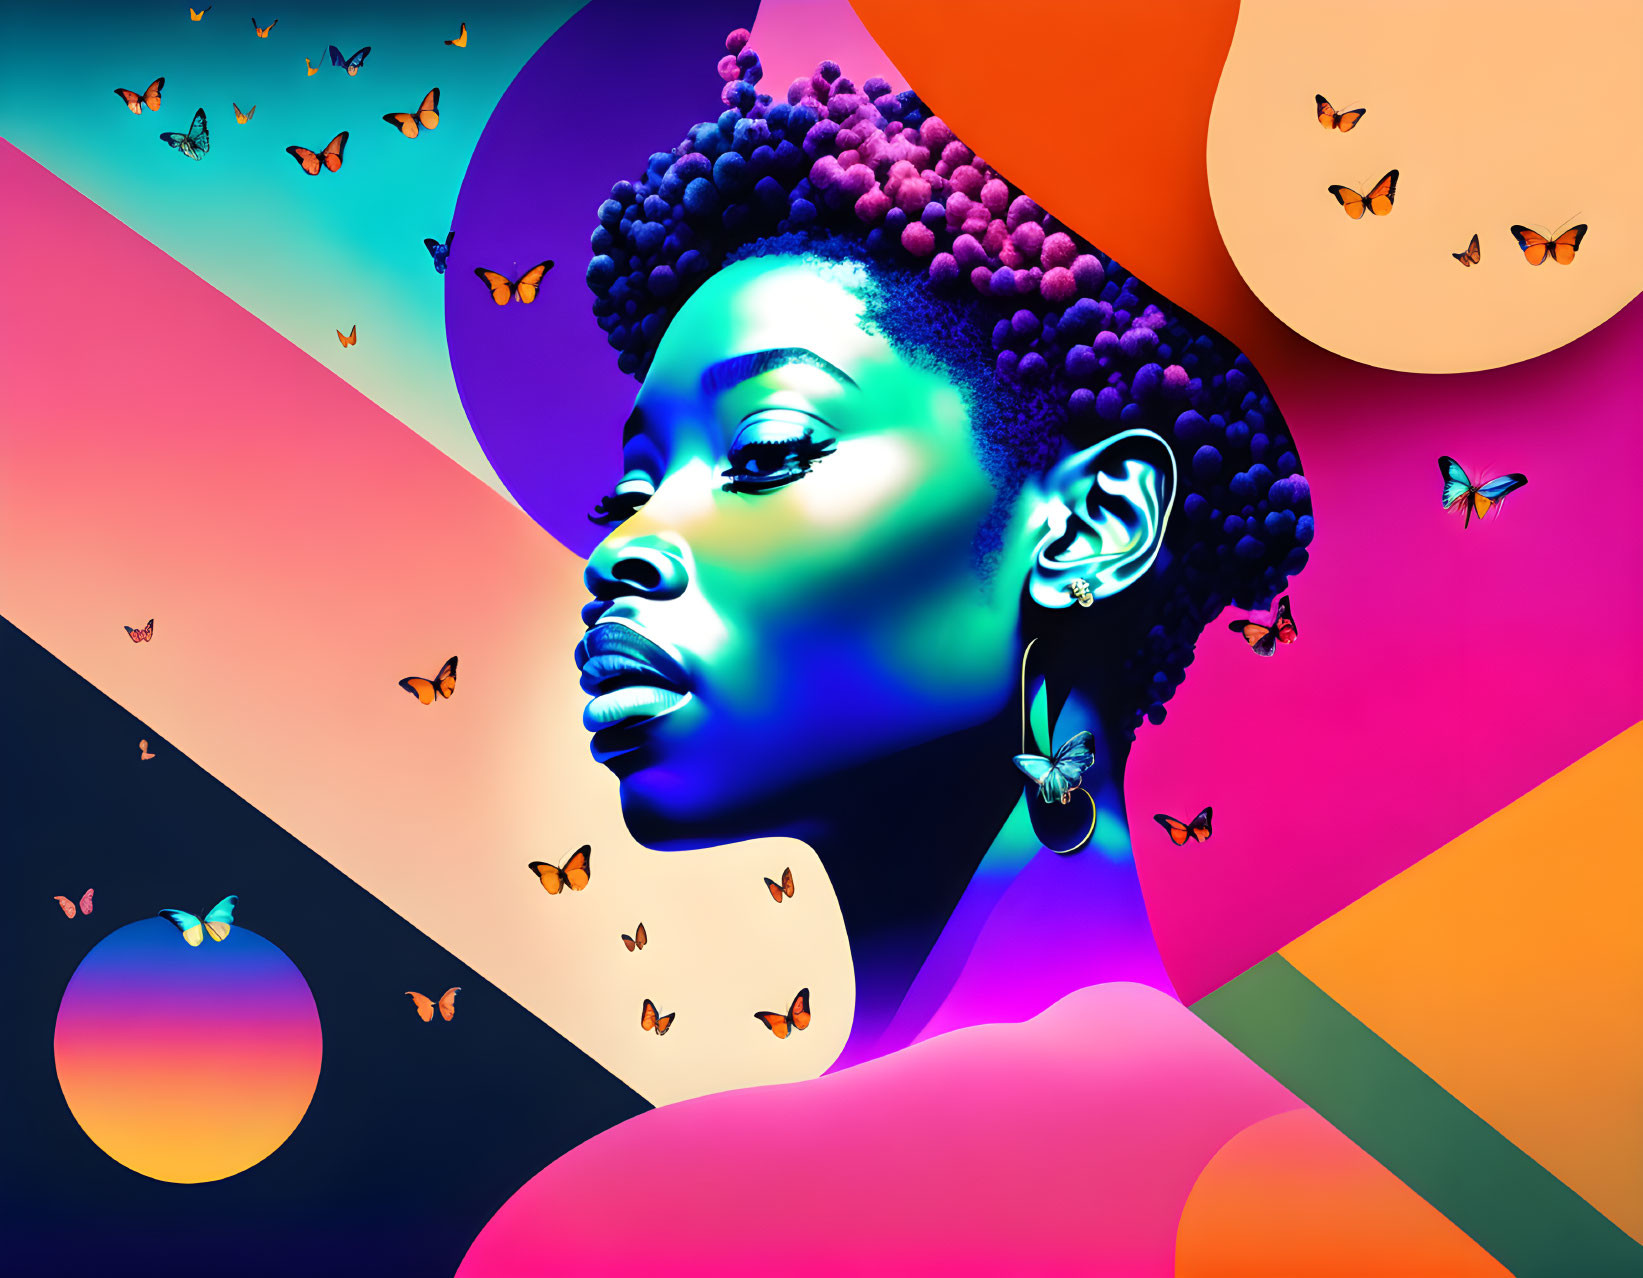 Colorful digital artwork: Woman's profile with purple hair, butterflies, and sunset gradient.